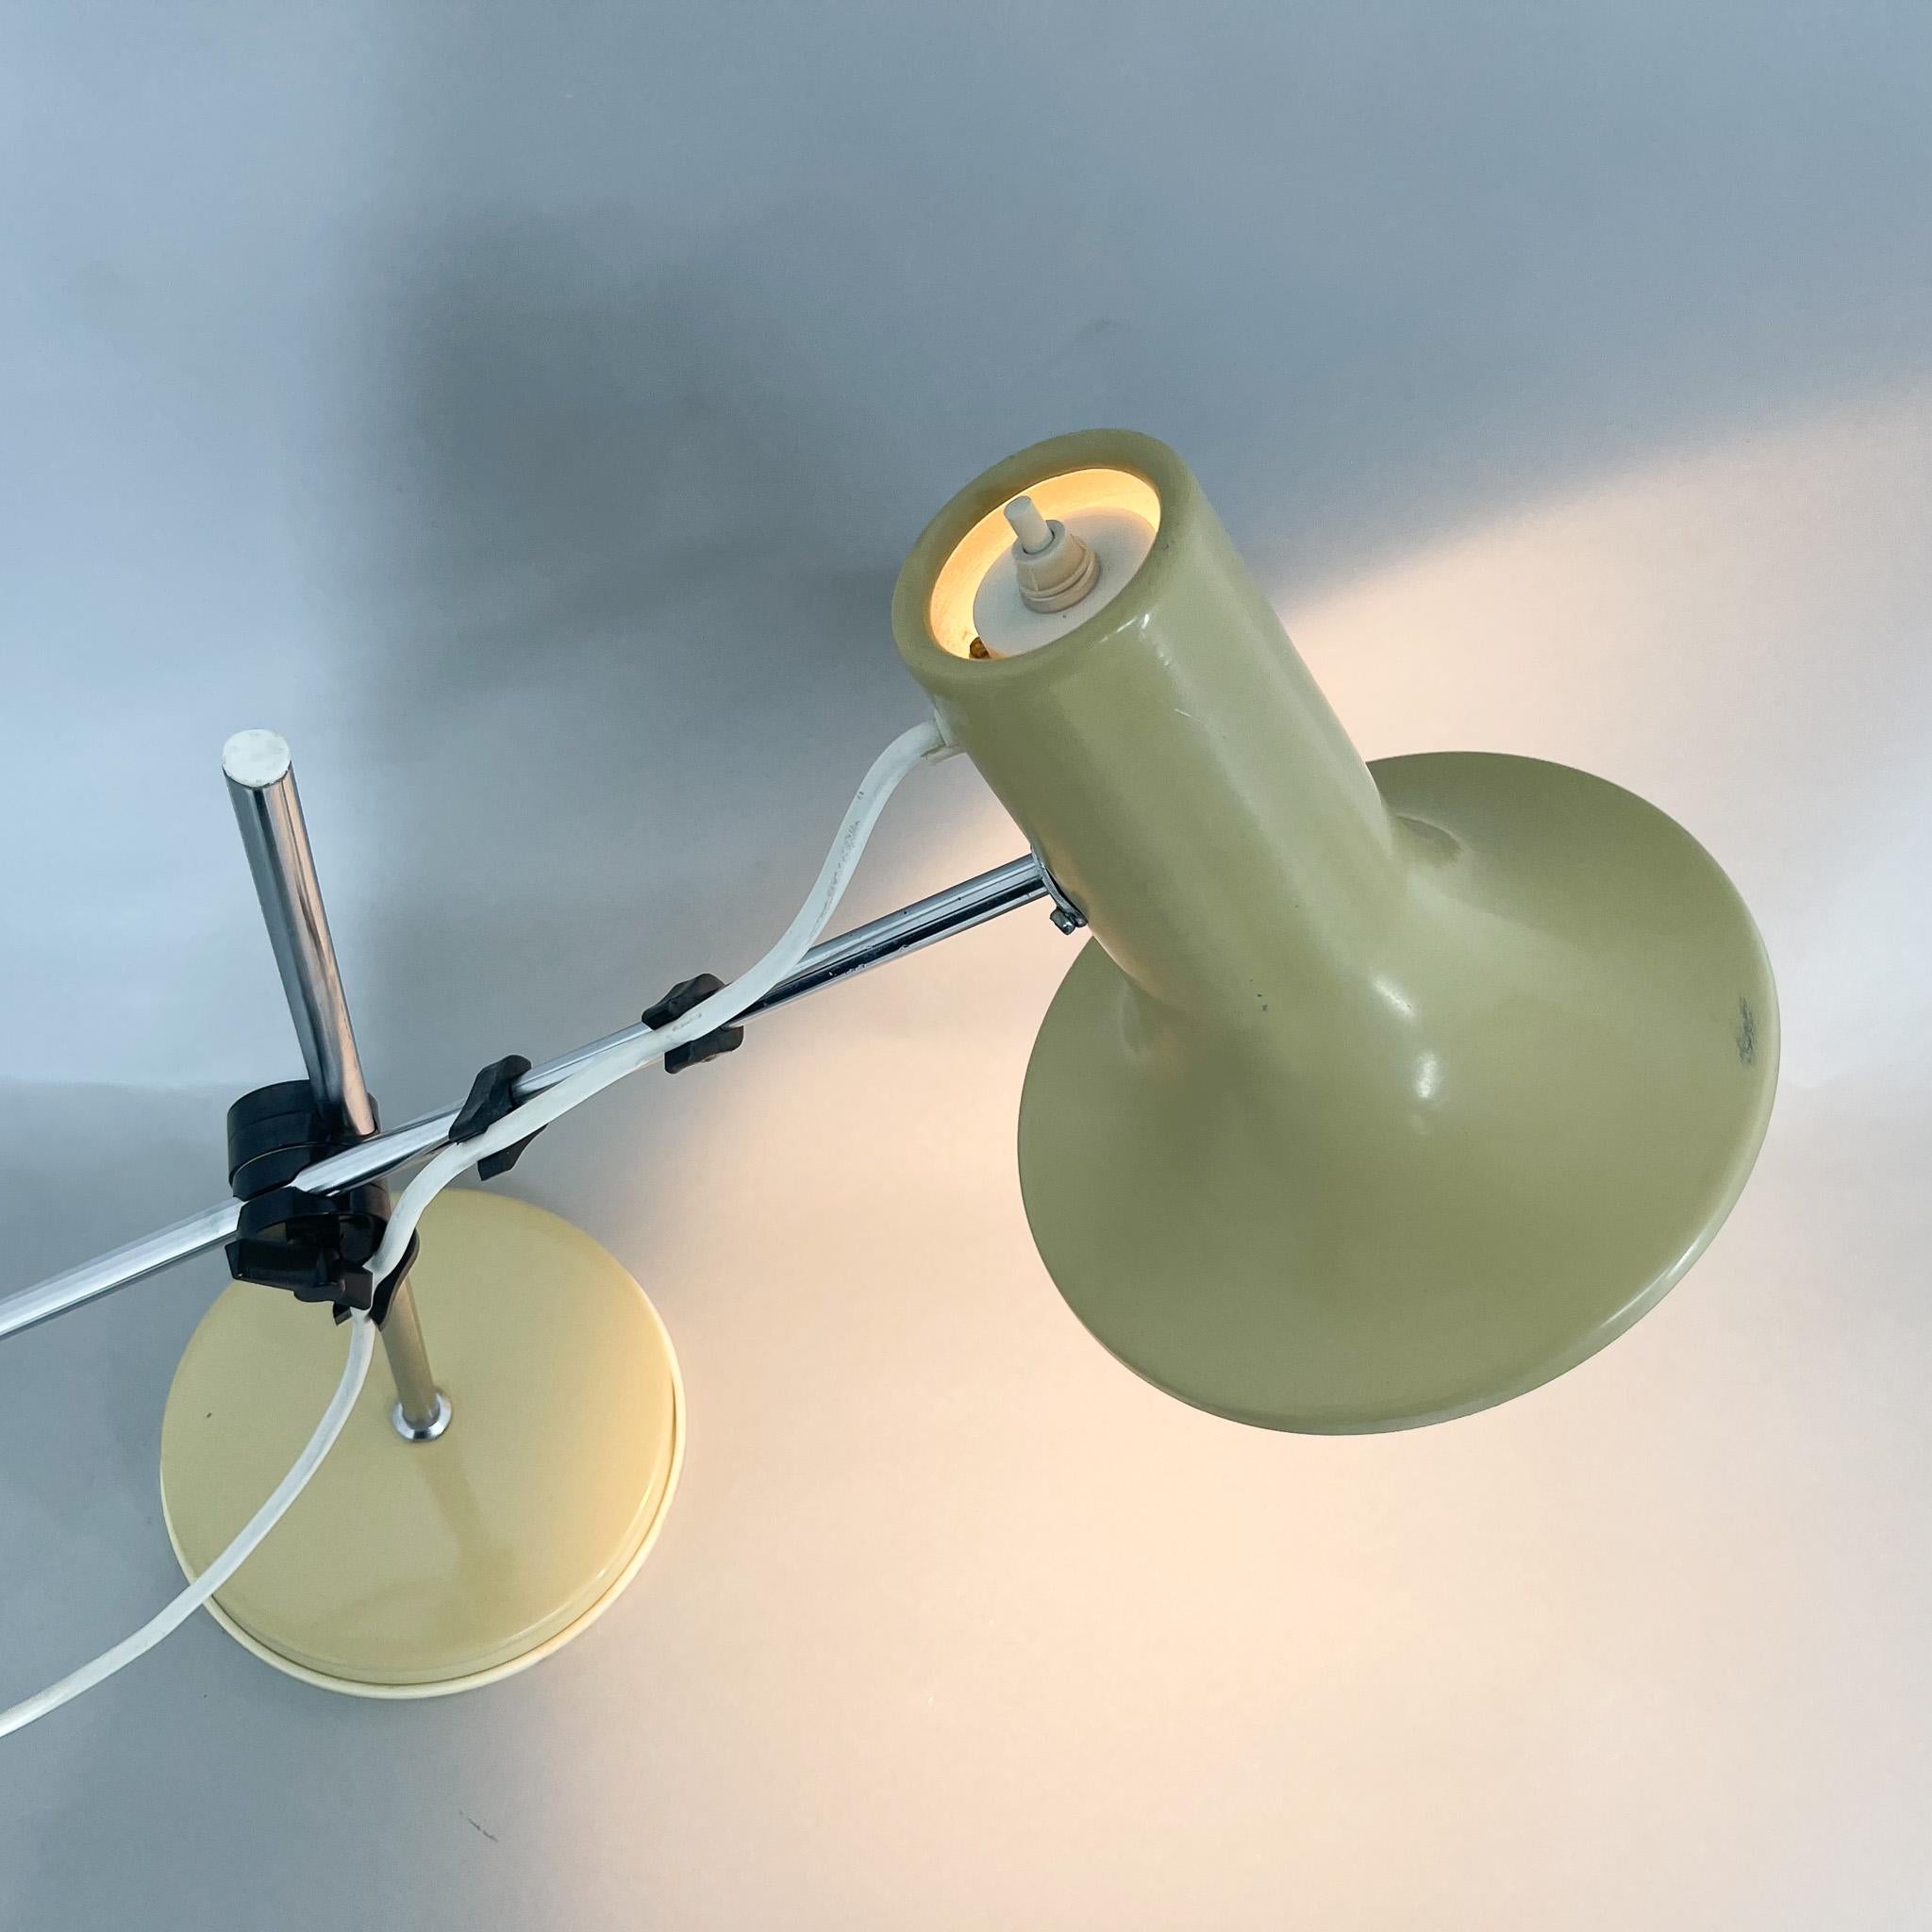 1970s Adjustable Metal Table Lamp in Creamy Color, Hungary For Sale 4